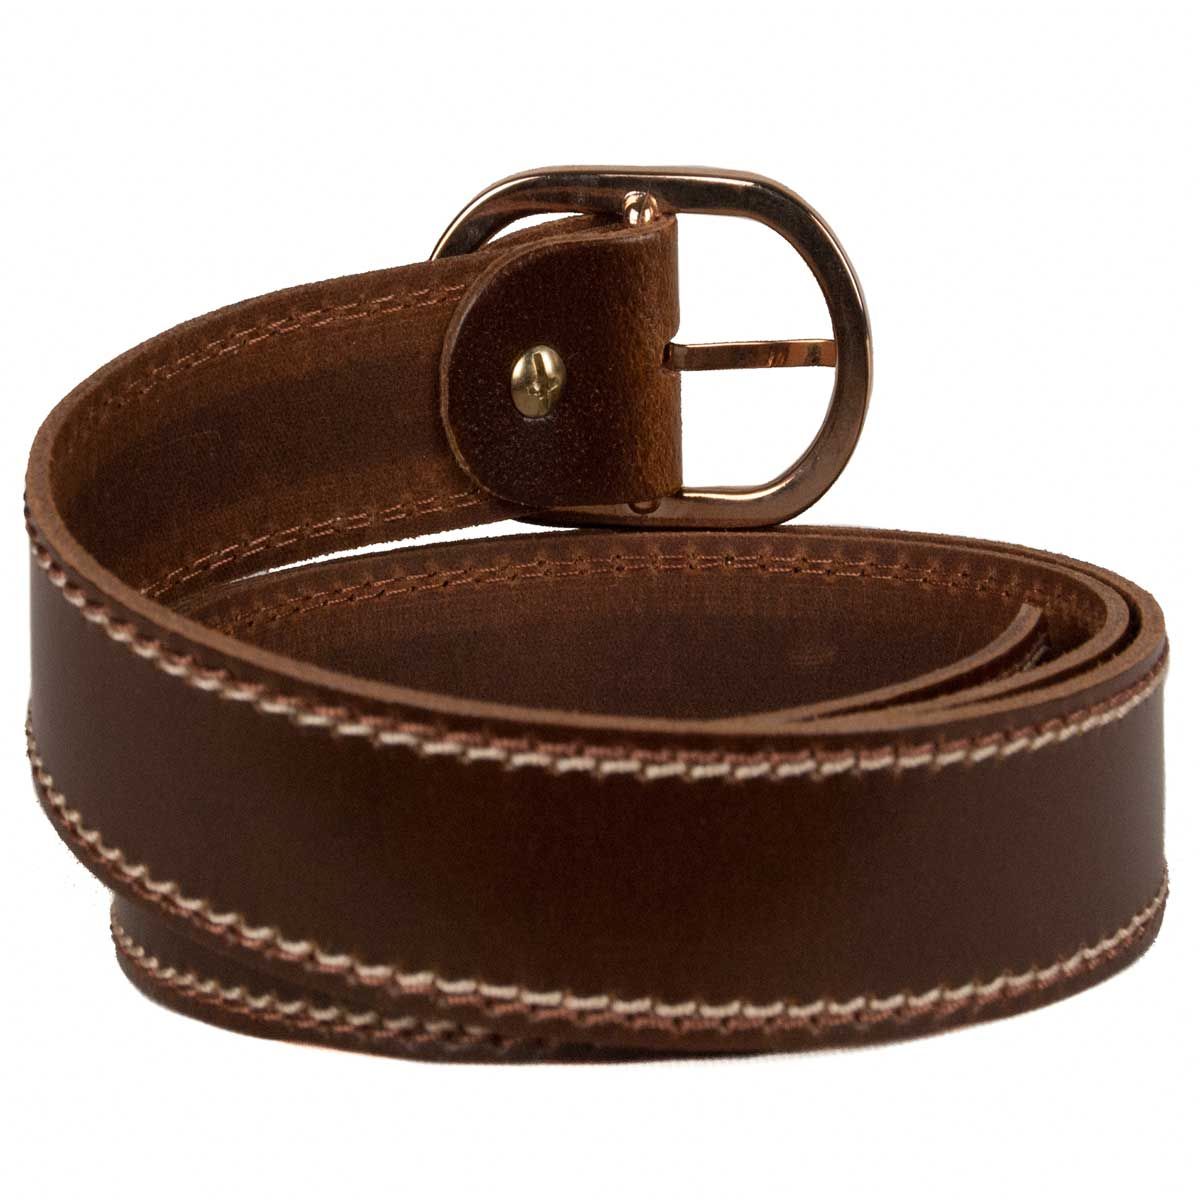 Capsule collection Emilio Faraoni. Women's belt made of 100% natural skin with an elegant and modern design, adaptable, with oval metal buckle in very current gold. MADE IN SPAIN.